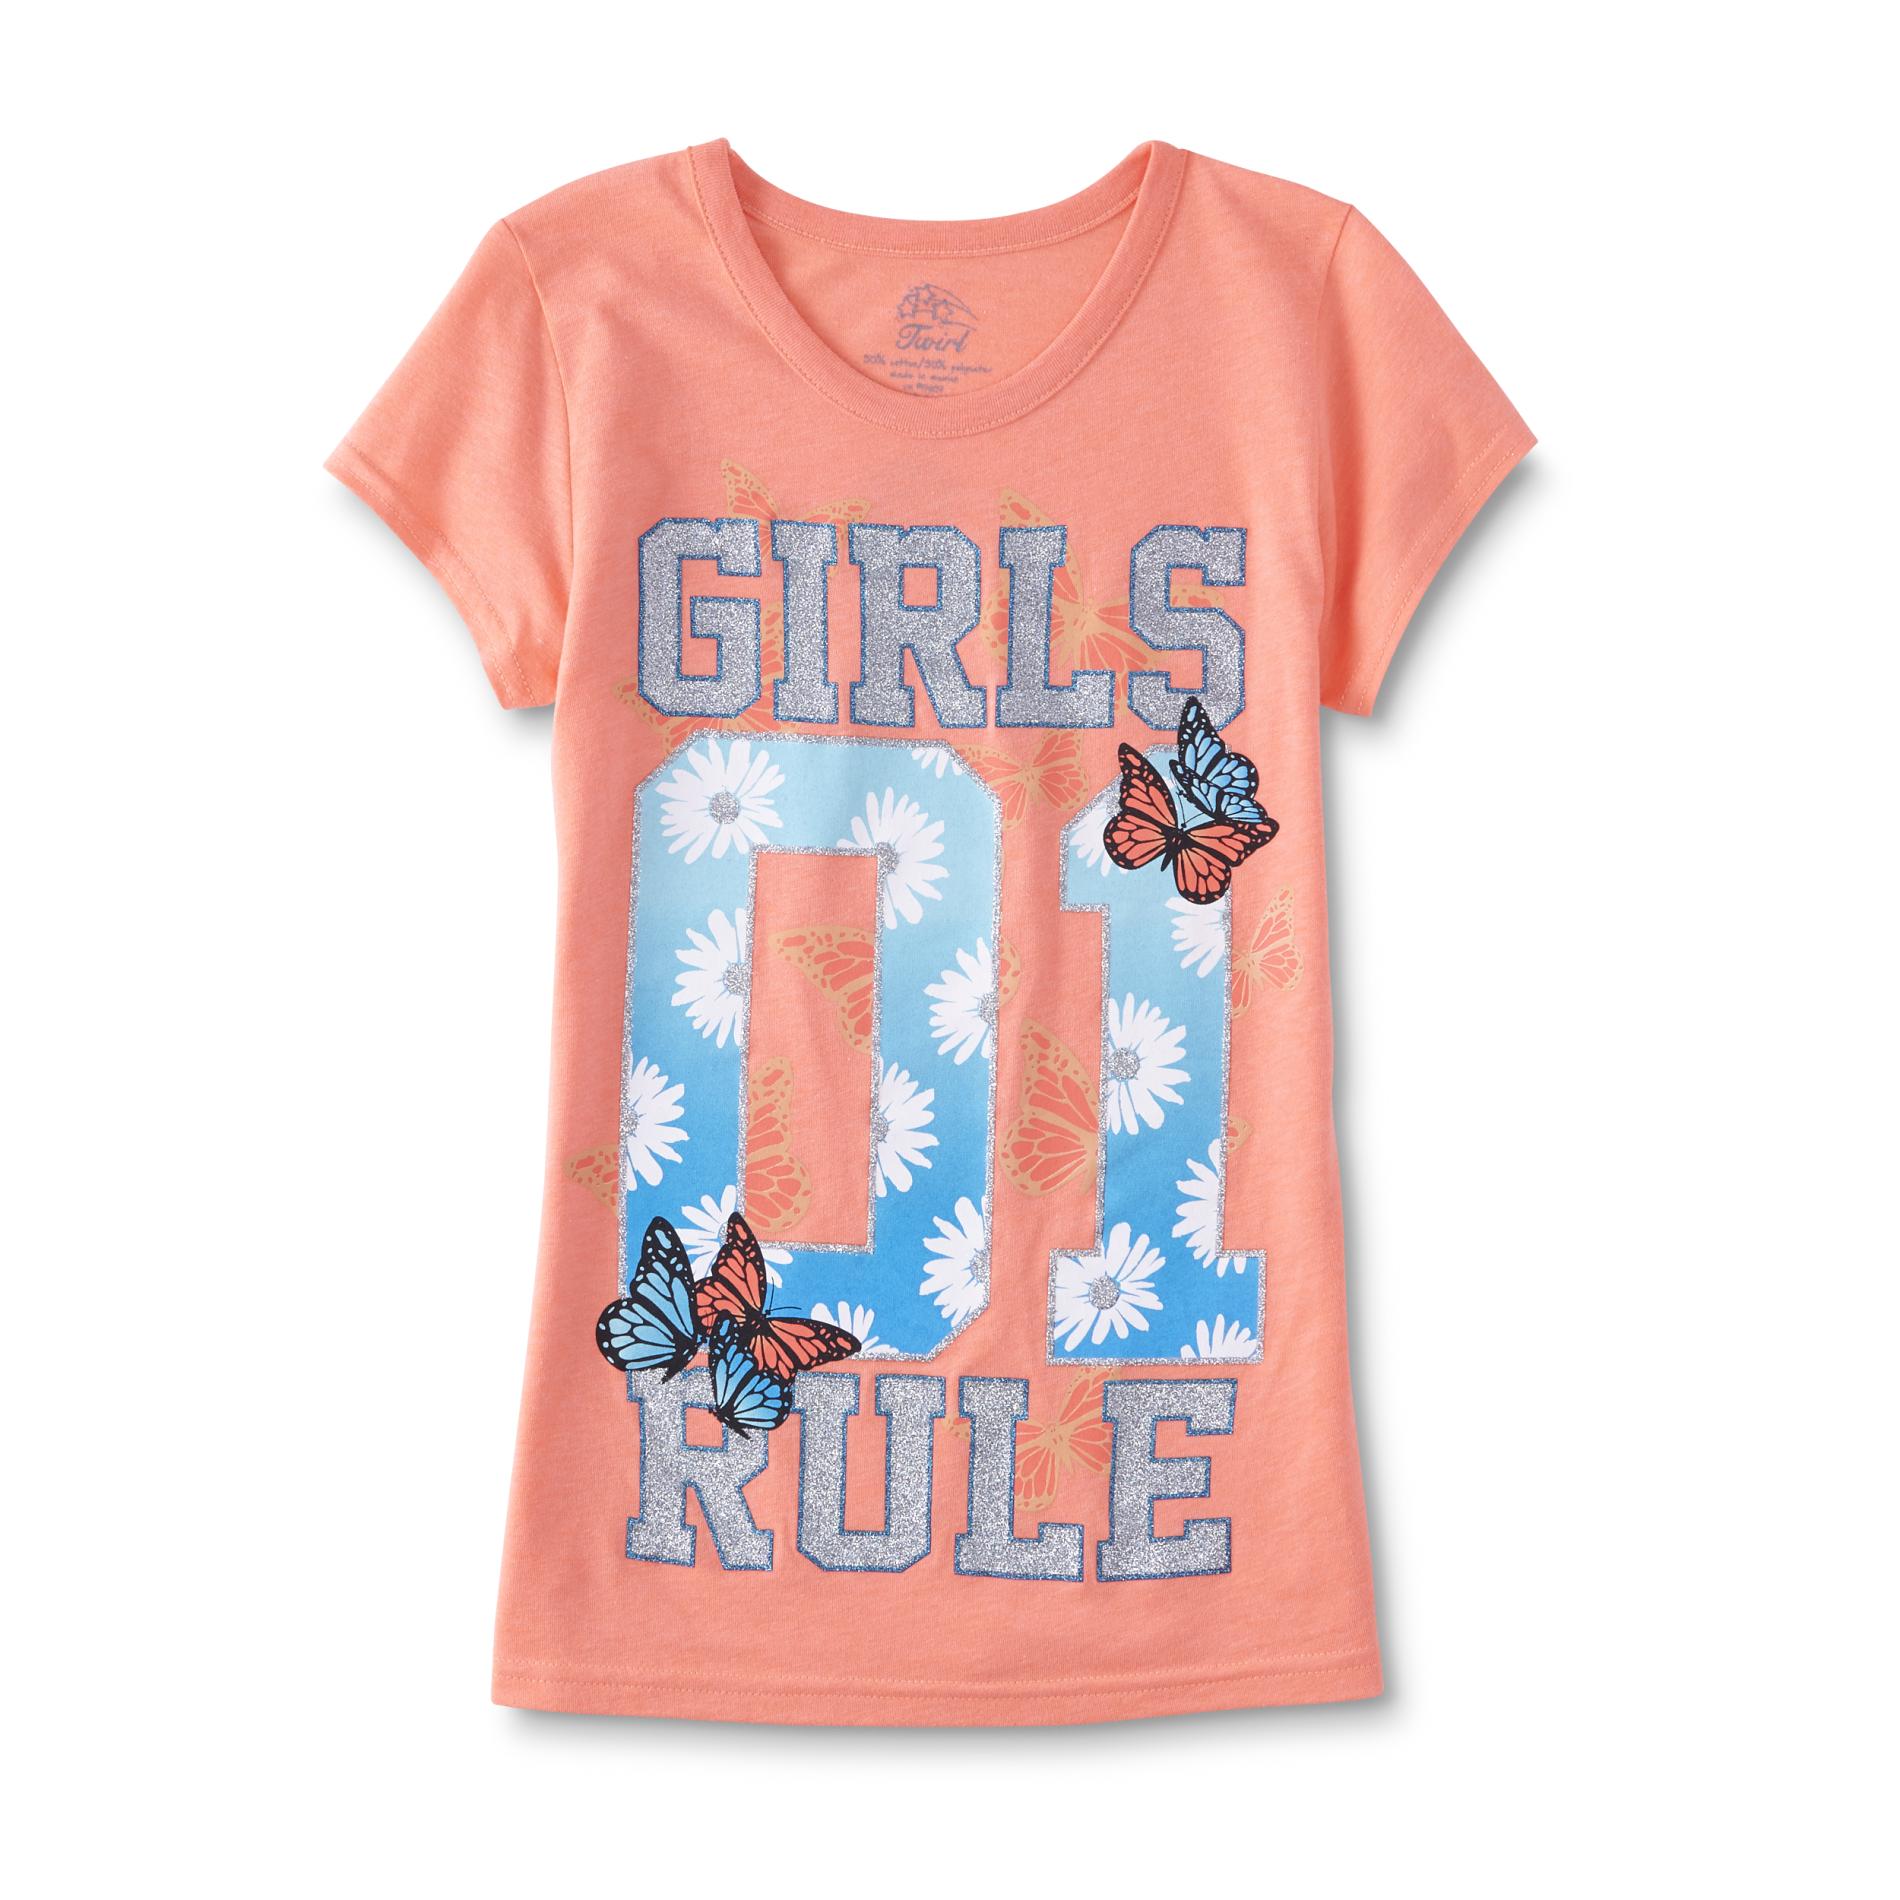 Route 66 Girls' Graphic T-Shirt - Girls Rule